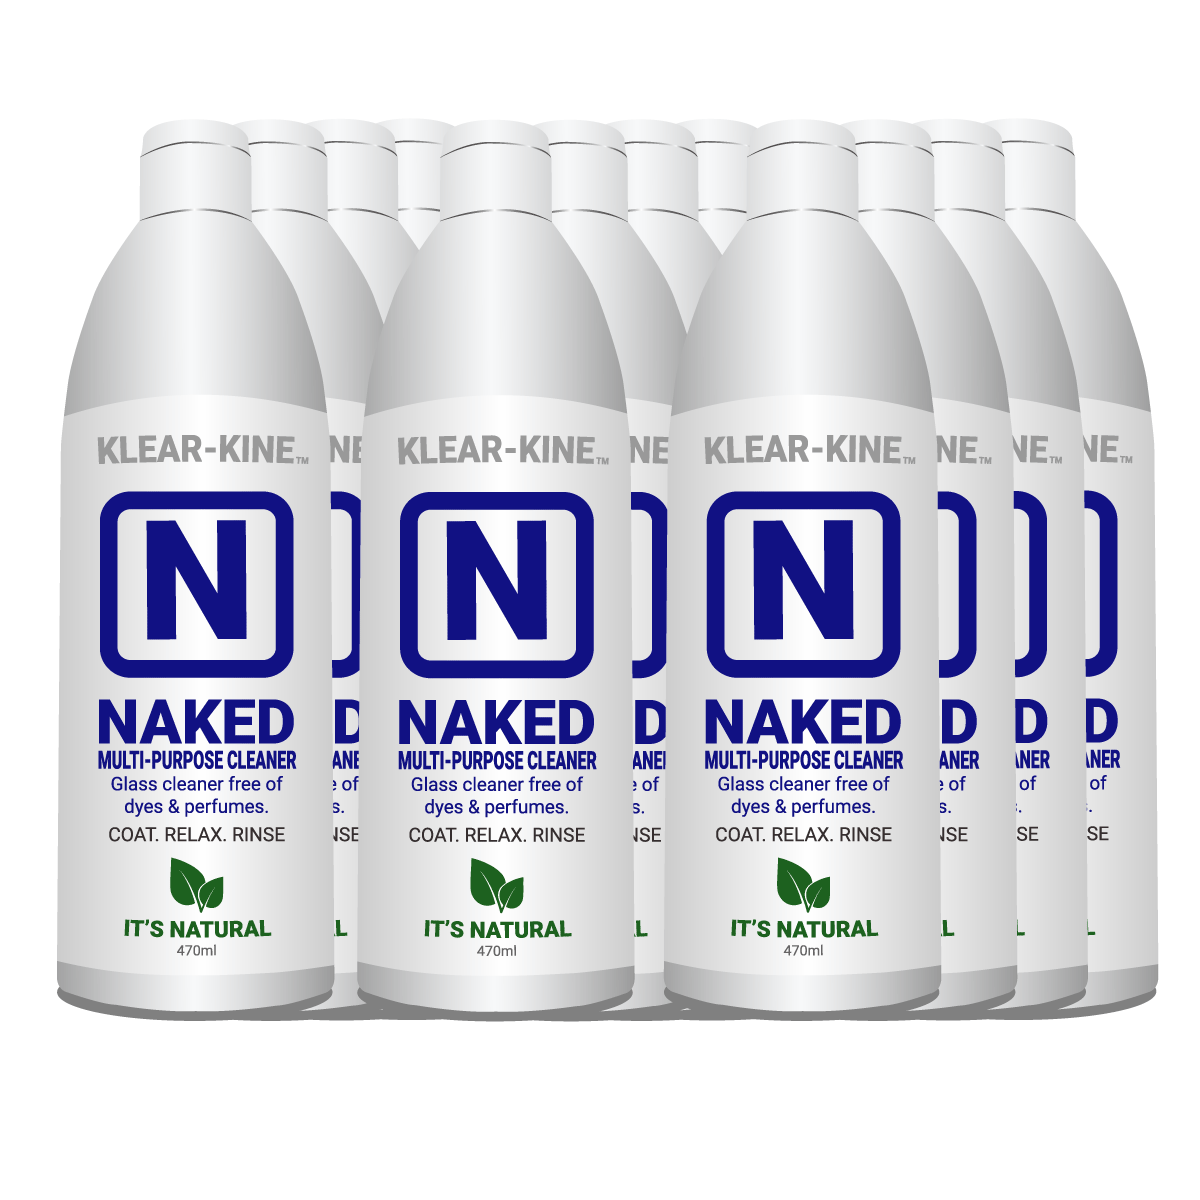 KLEAR Naked 470ml bong cleaner Half case designed for water pipe solution green slim coat relax rinse your 420 bong and 710 dab bong cleaner. Krypto-Caps